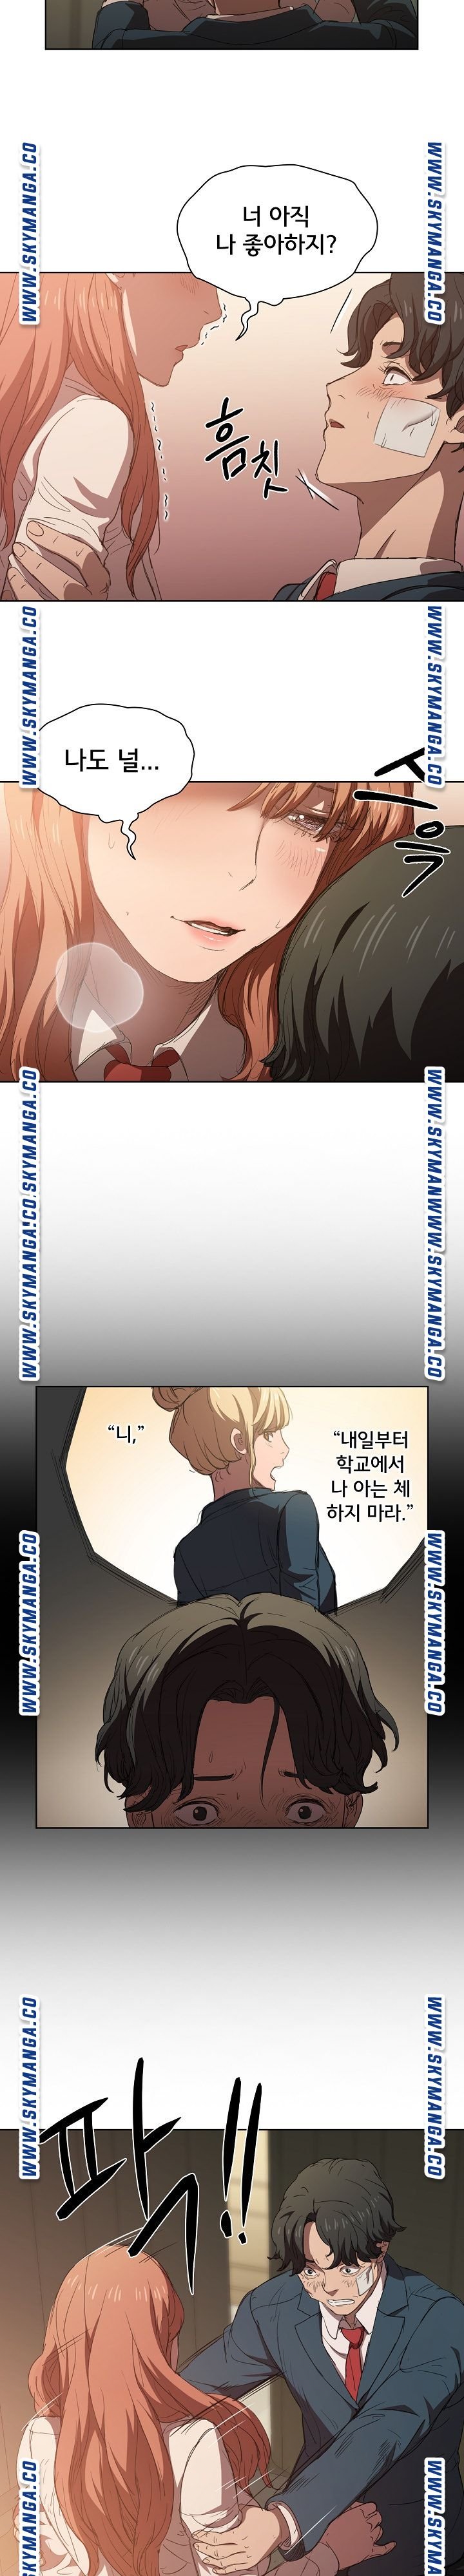 how-about-getting-lost-raw-chap-3-3